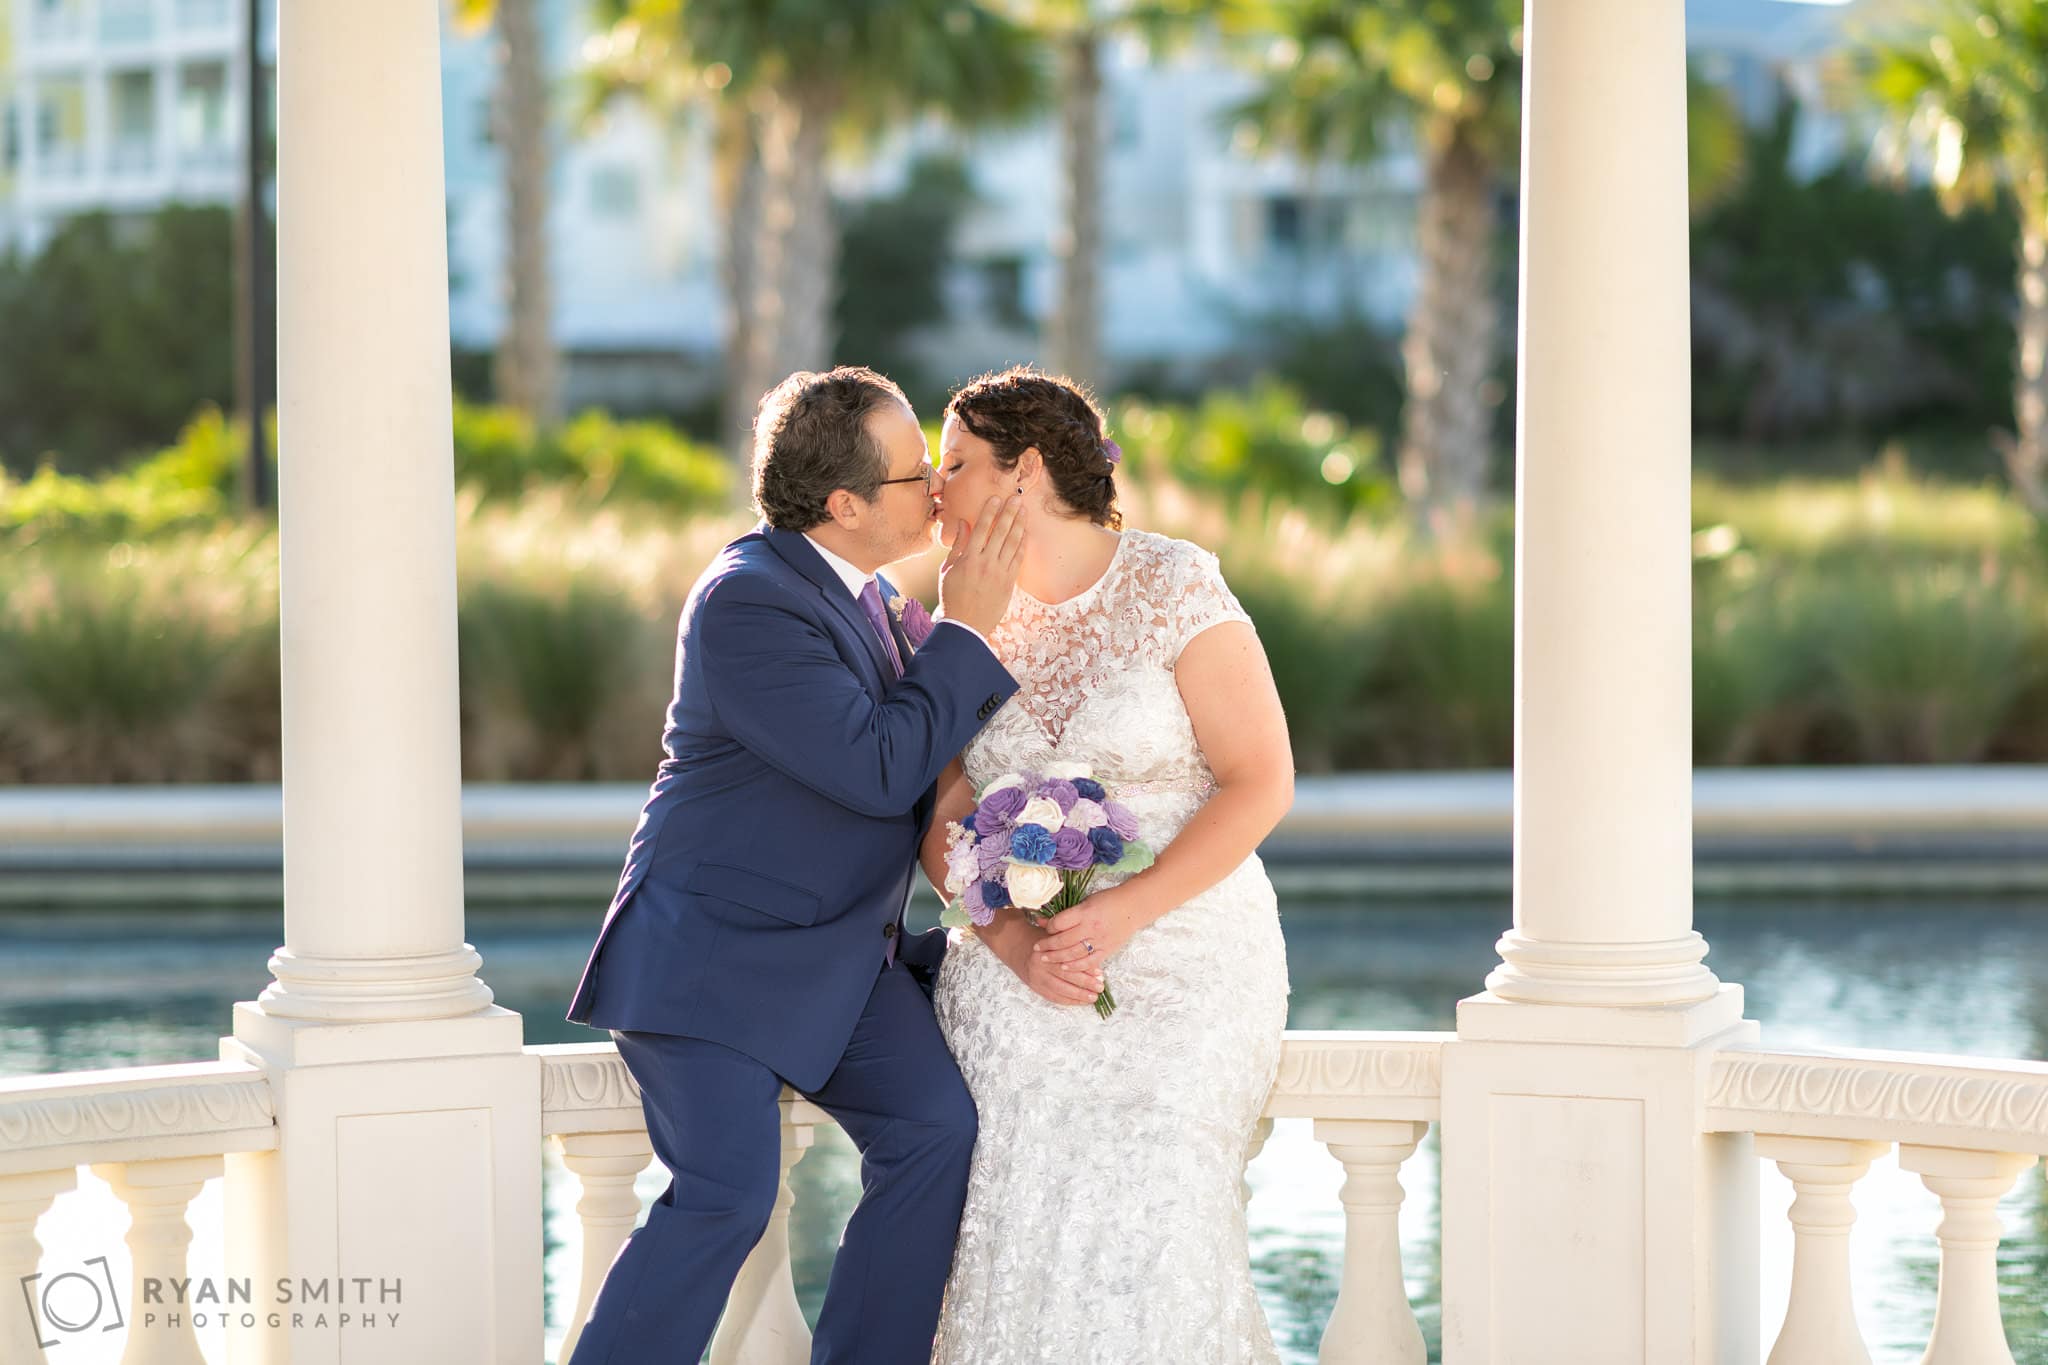 Sitting together and kissing on the gazebo  - North Beach Plantation